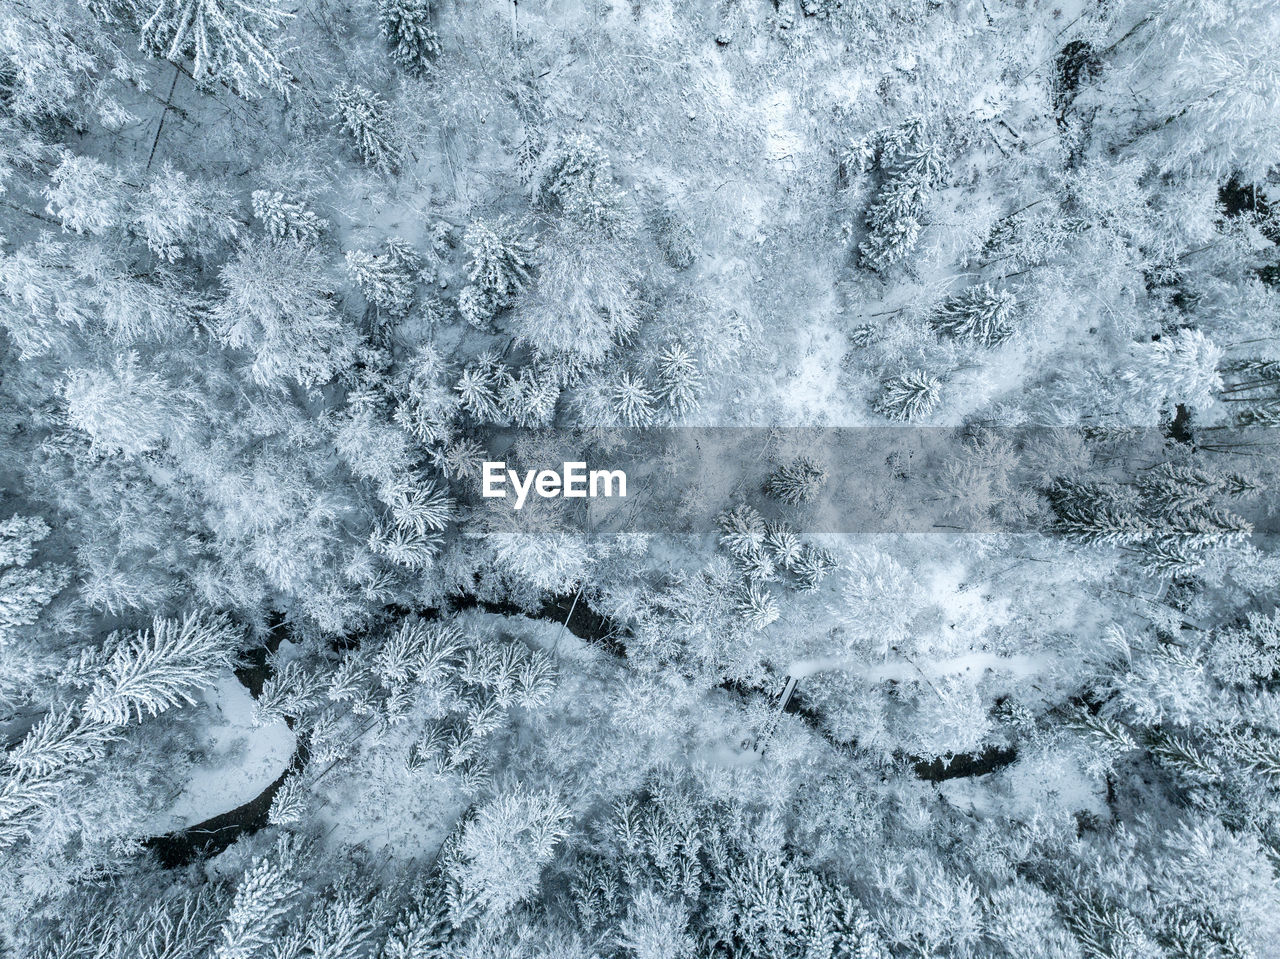 High angle view of snow covered trees in winter in rural landscape